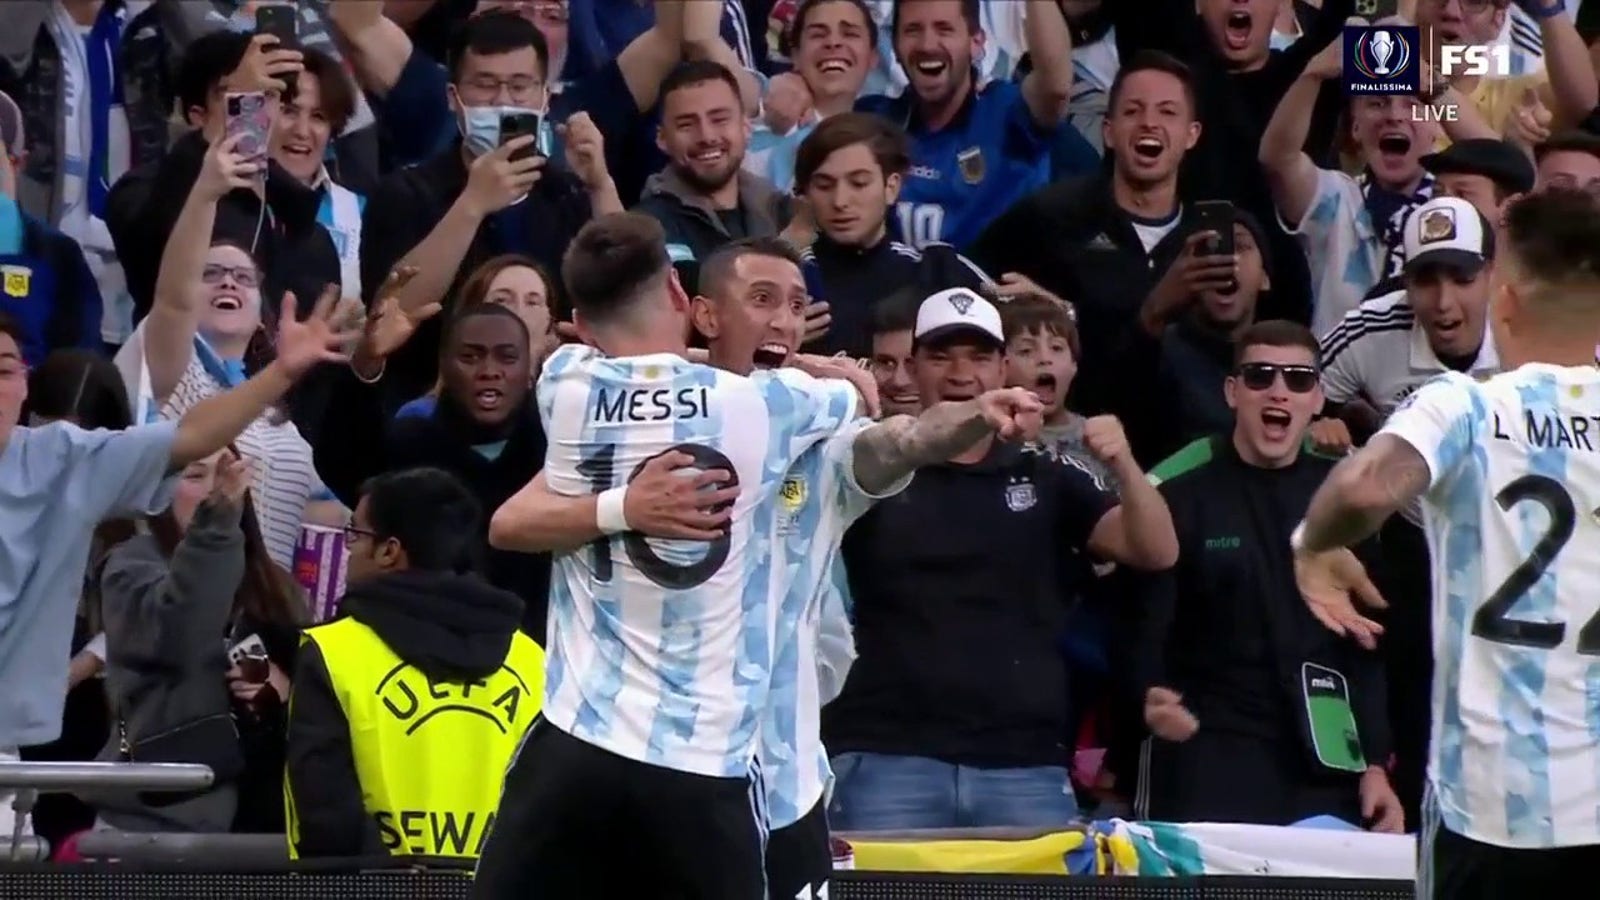 Lautaro Martinez finds Ángel Di María, who scores to put Argentina ahead 2-0 to end the first half